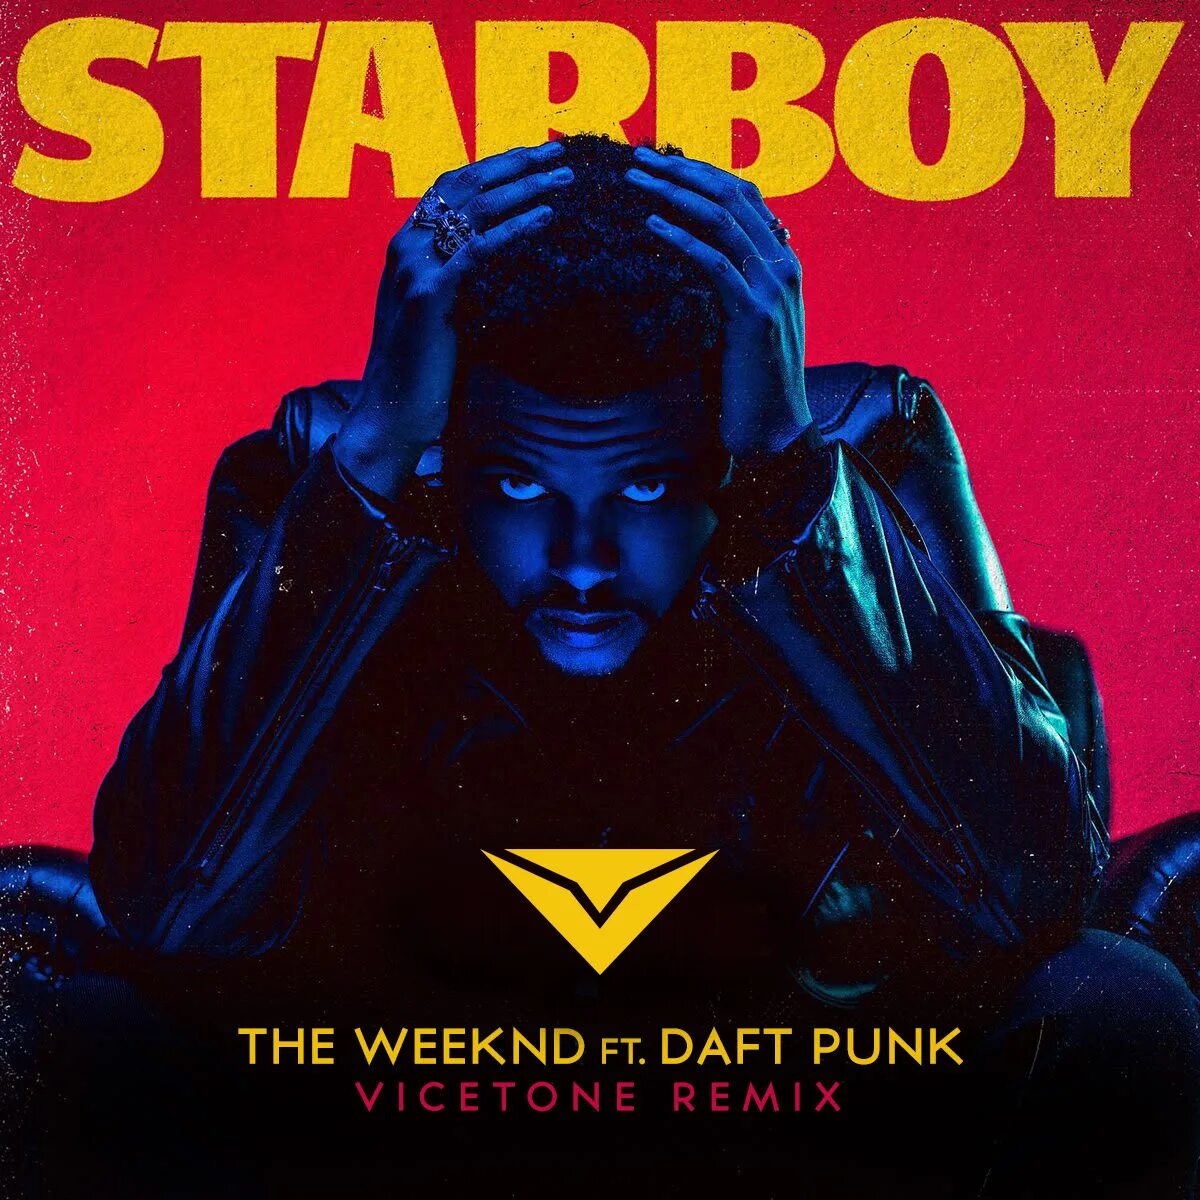 The weekend feat. The weekend Daft Punk Starboy. Daft Punk the Weeknd. The Weeknd - Starboy ft. Daft Punk. Star boy the Weeknd.